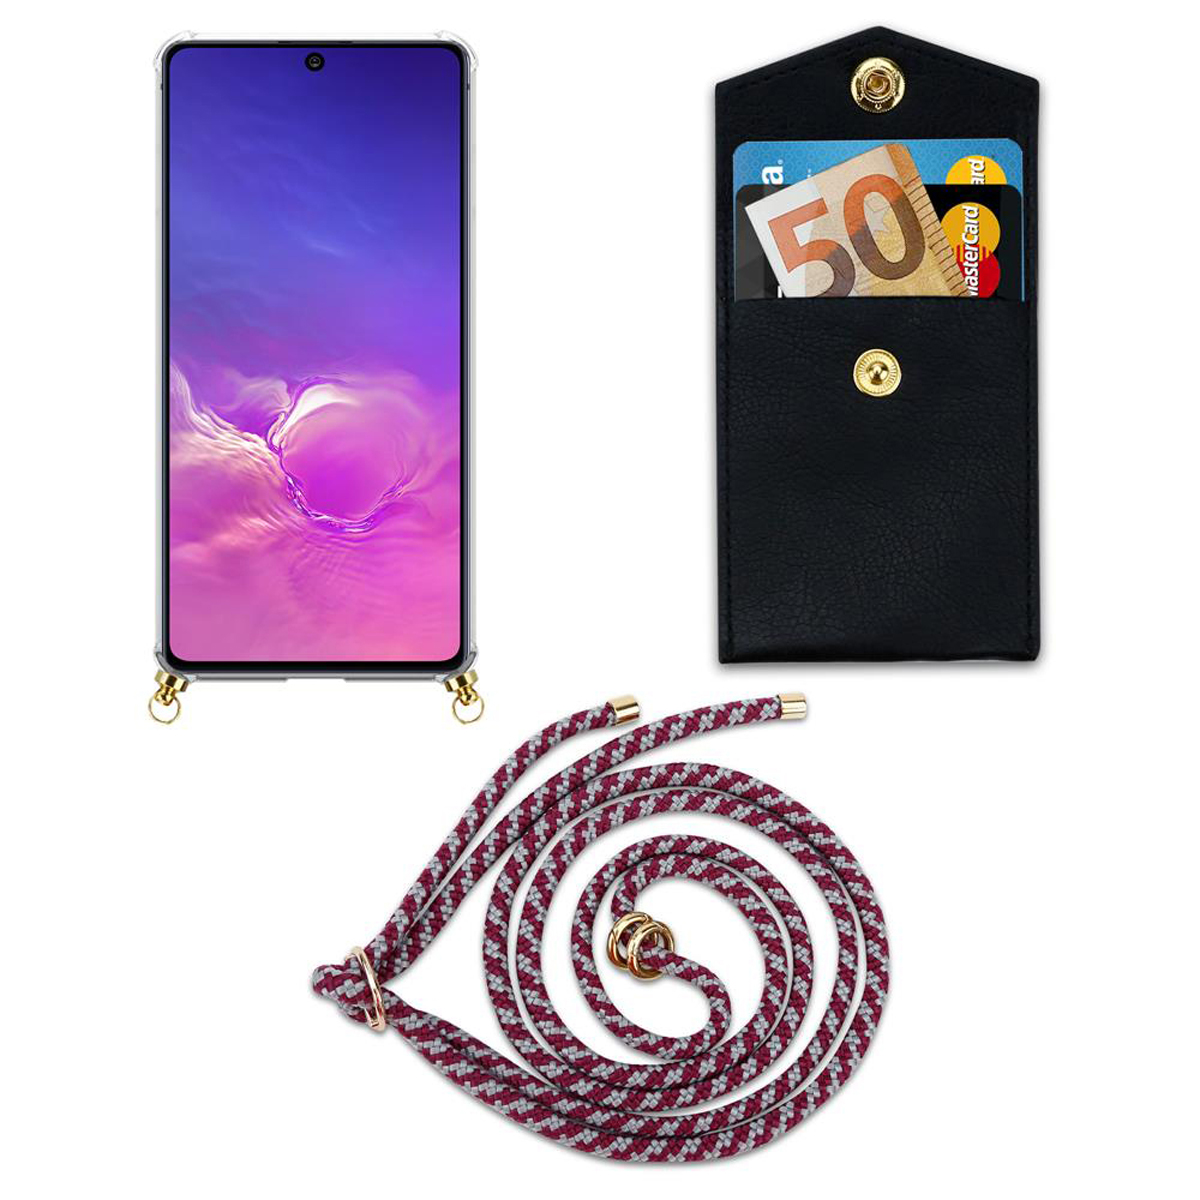 und CADORABO Backcover, Hülle, LITE Kordel ROT Kette Gold M80s, WEIß / Band Galaxy / A91 Ringen, Handy mit Samsung, S10 abnehmbarer